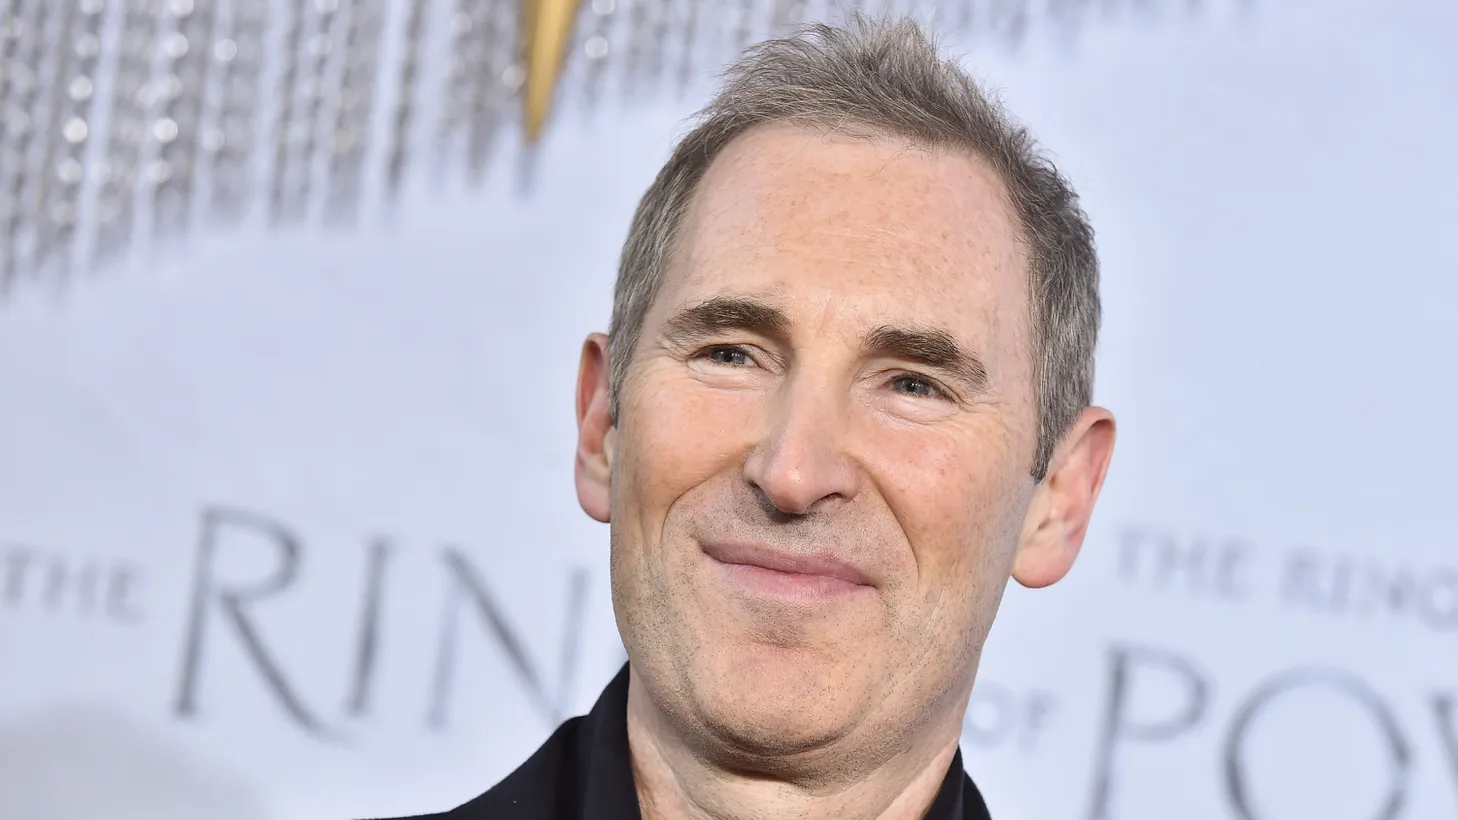 Amazon.com Inc. CEO Andy Jassy arrives at the premiere of Amazon Prime’s “The Lord of the Rings: The Rings of Power” in Los Angeles on August 15, 2022.